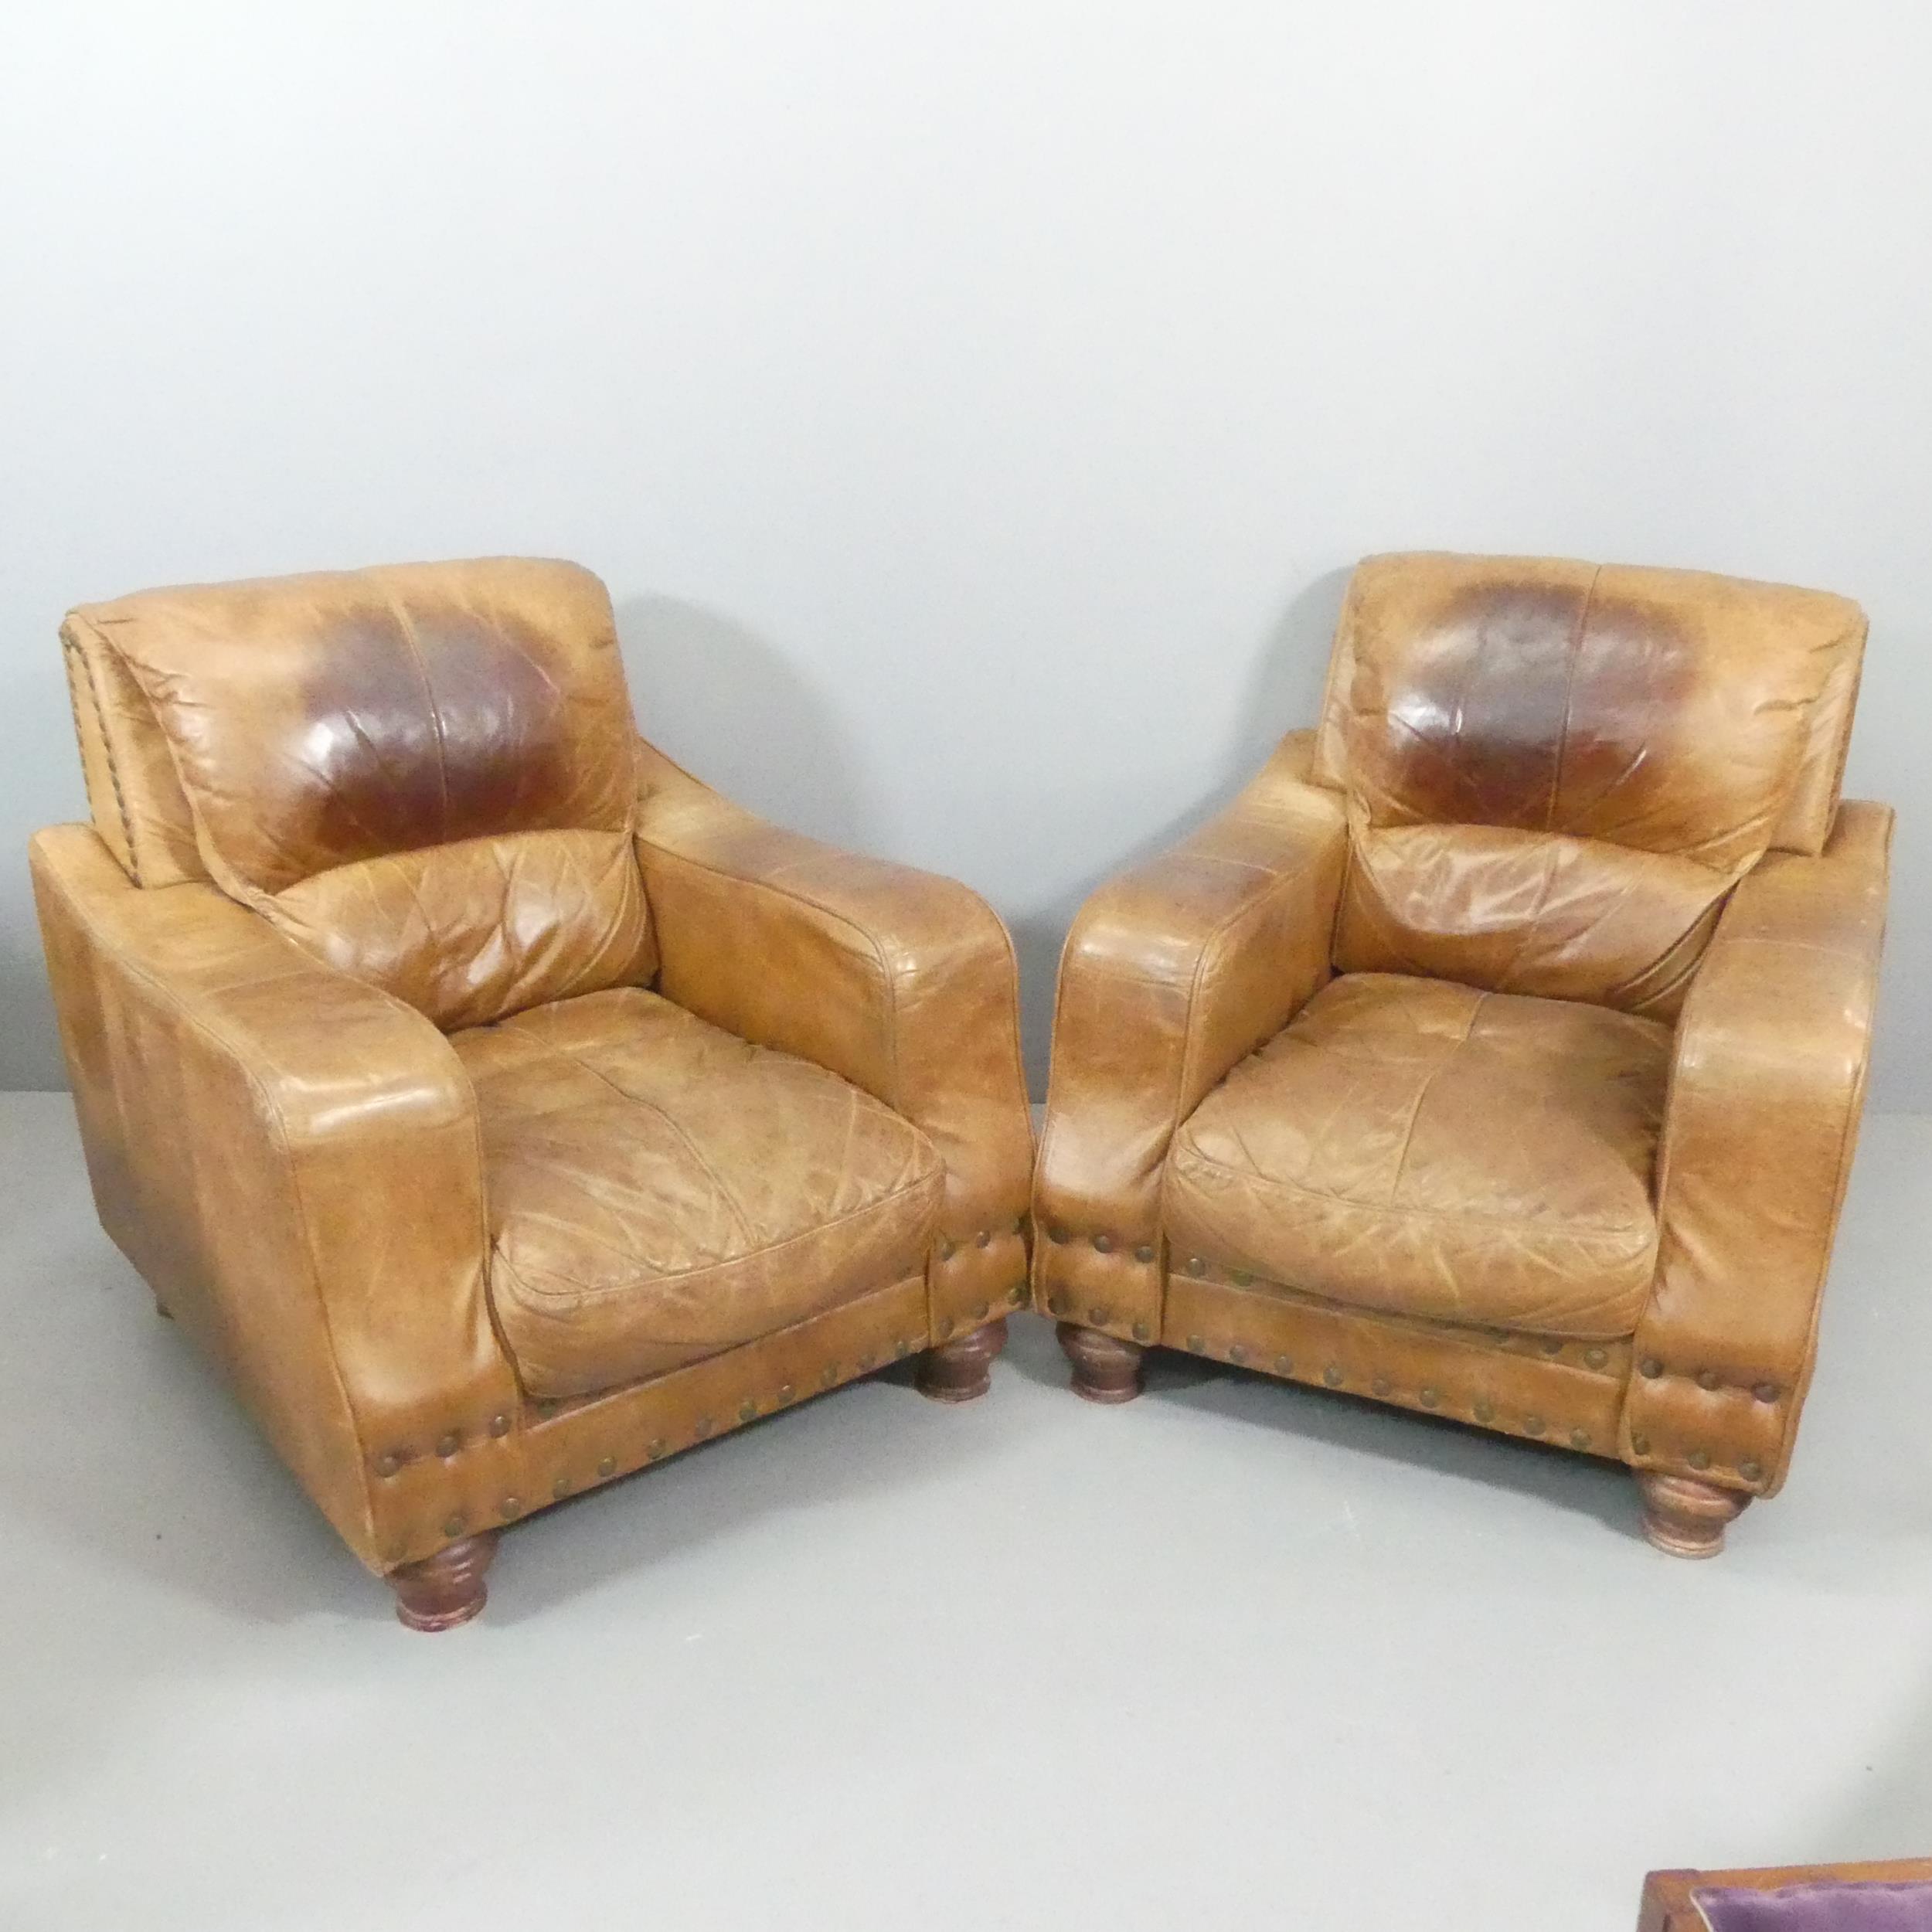 A pair of brown studded-leather upholstered club armchairs. Overall 85x94x94cm, seat 48x40x60cm.